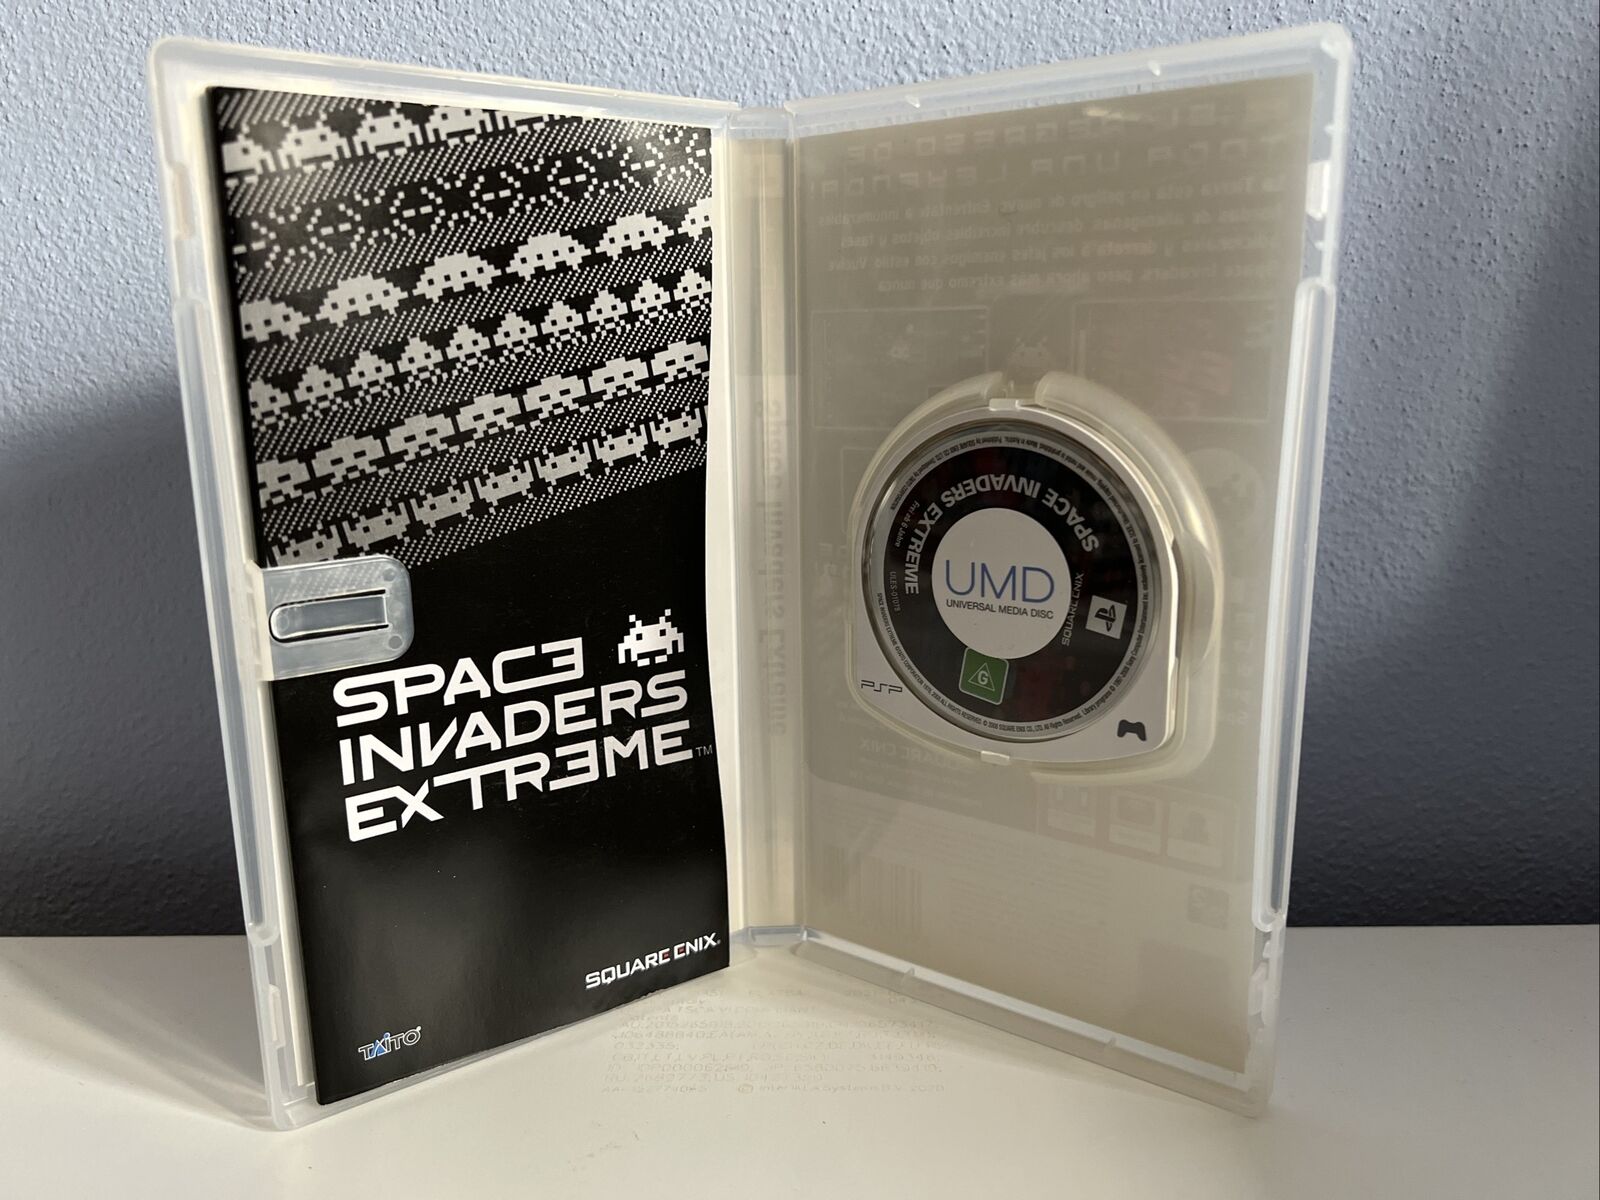 PSP-videogame-Space-Invaders-Extreme-133929243415-4